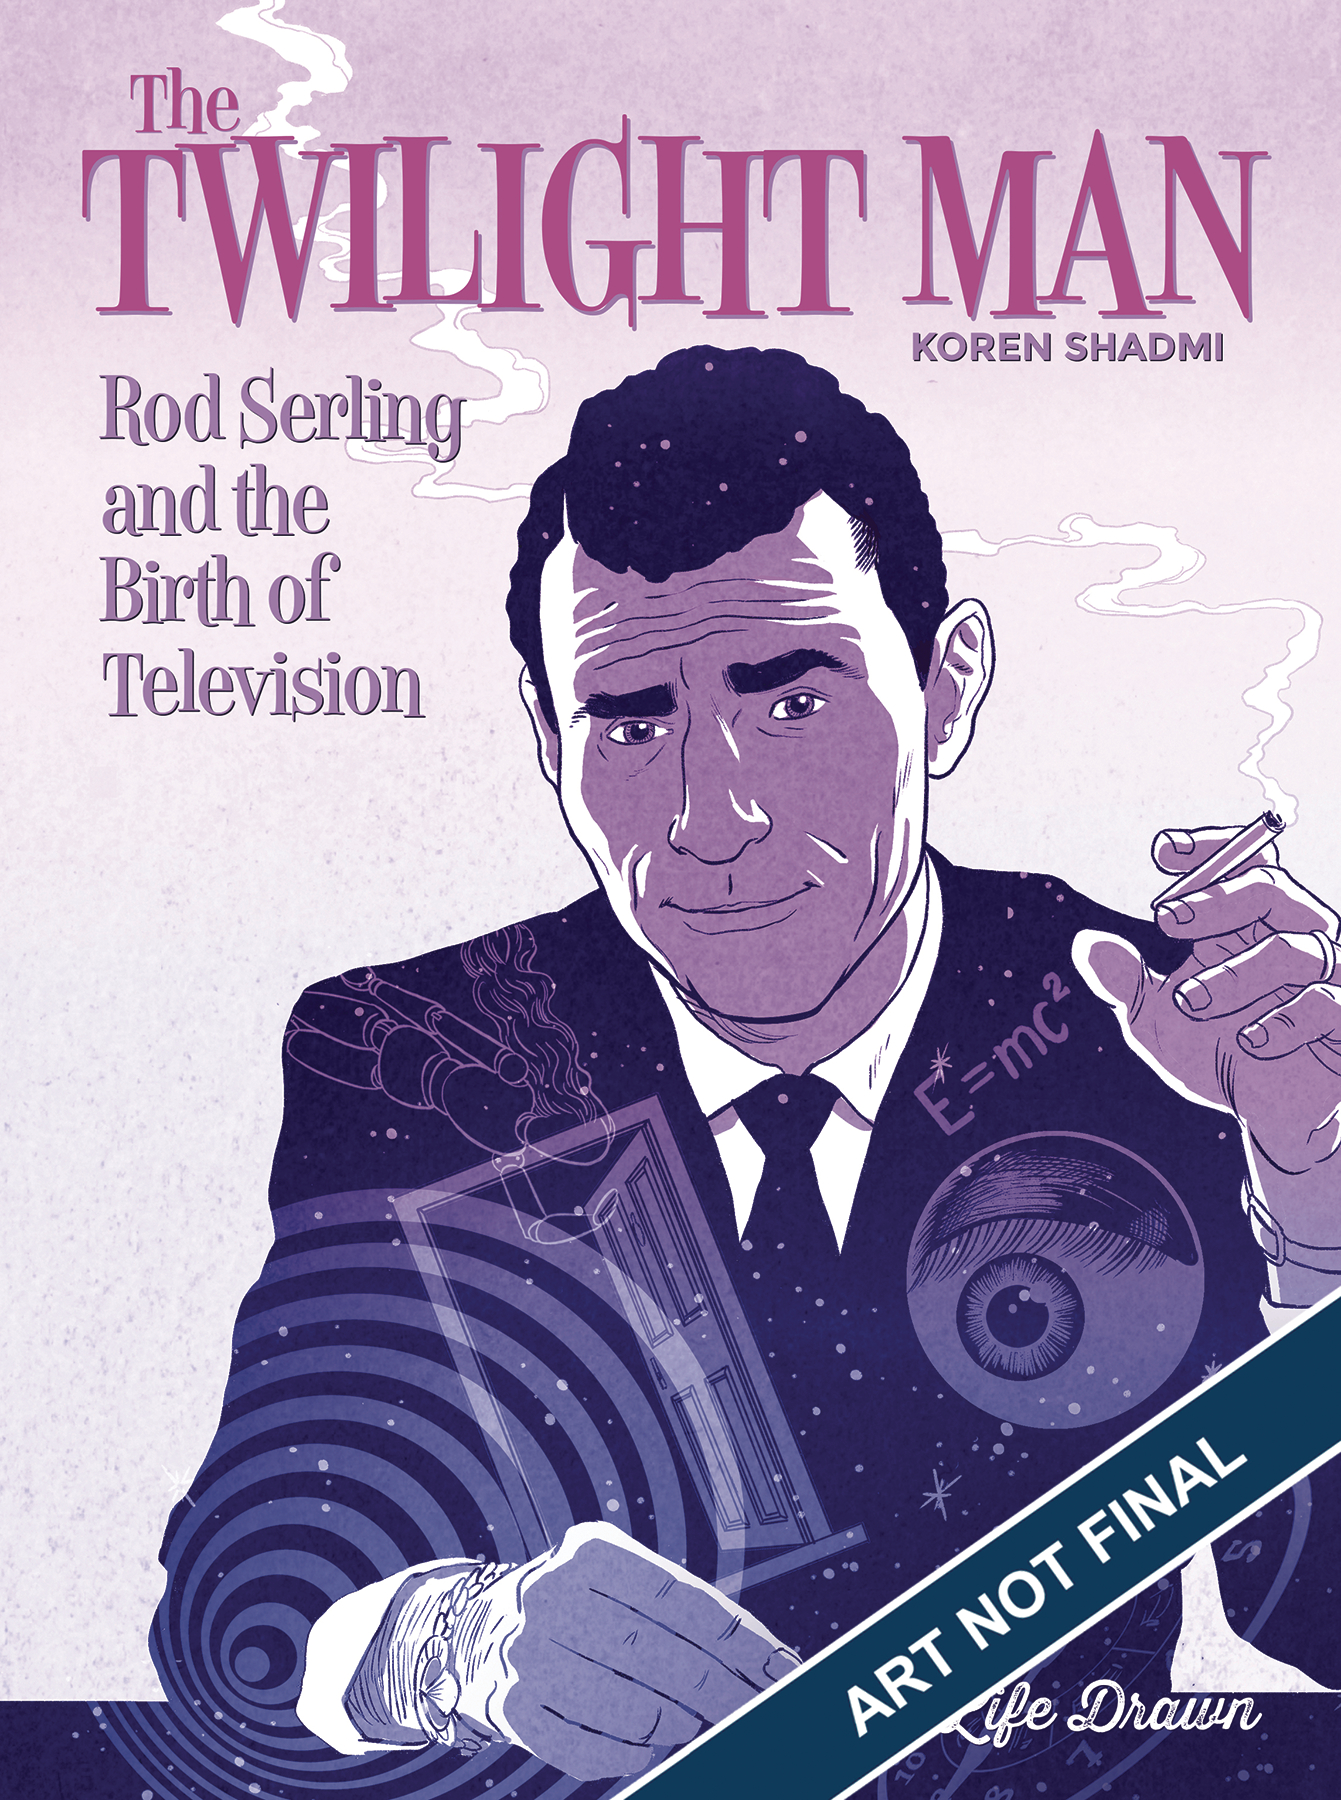 Twilight Man Rod Serling Birth of Television Soft Cover (Mature)